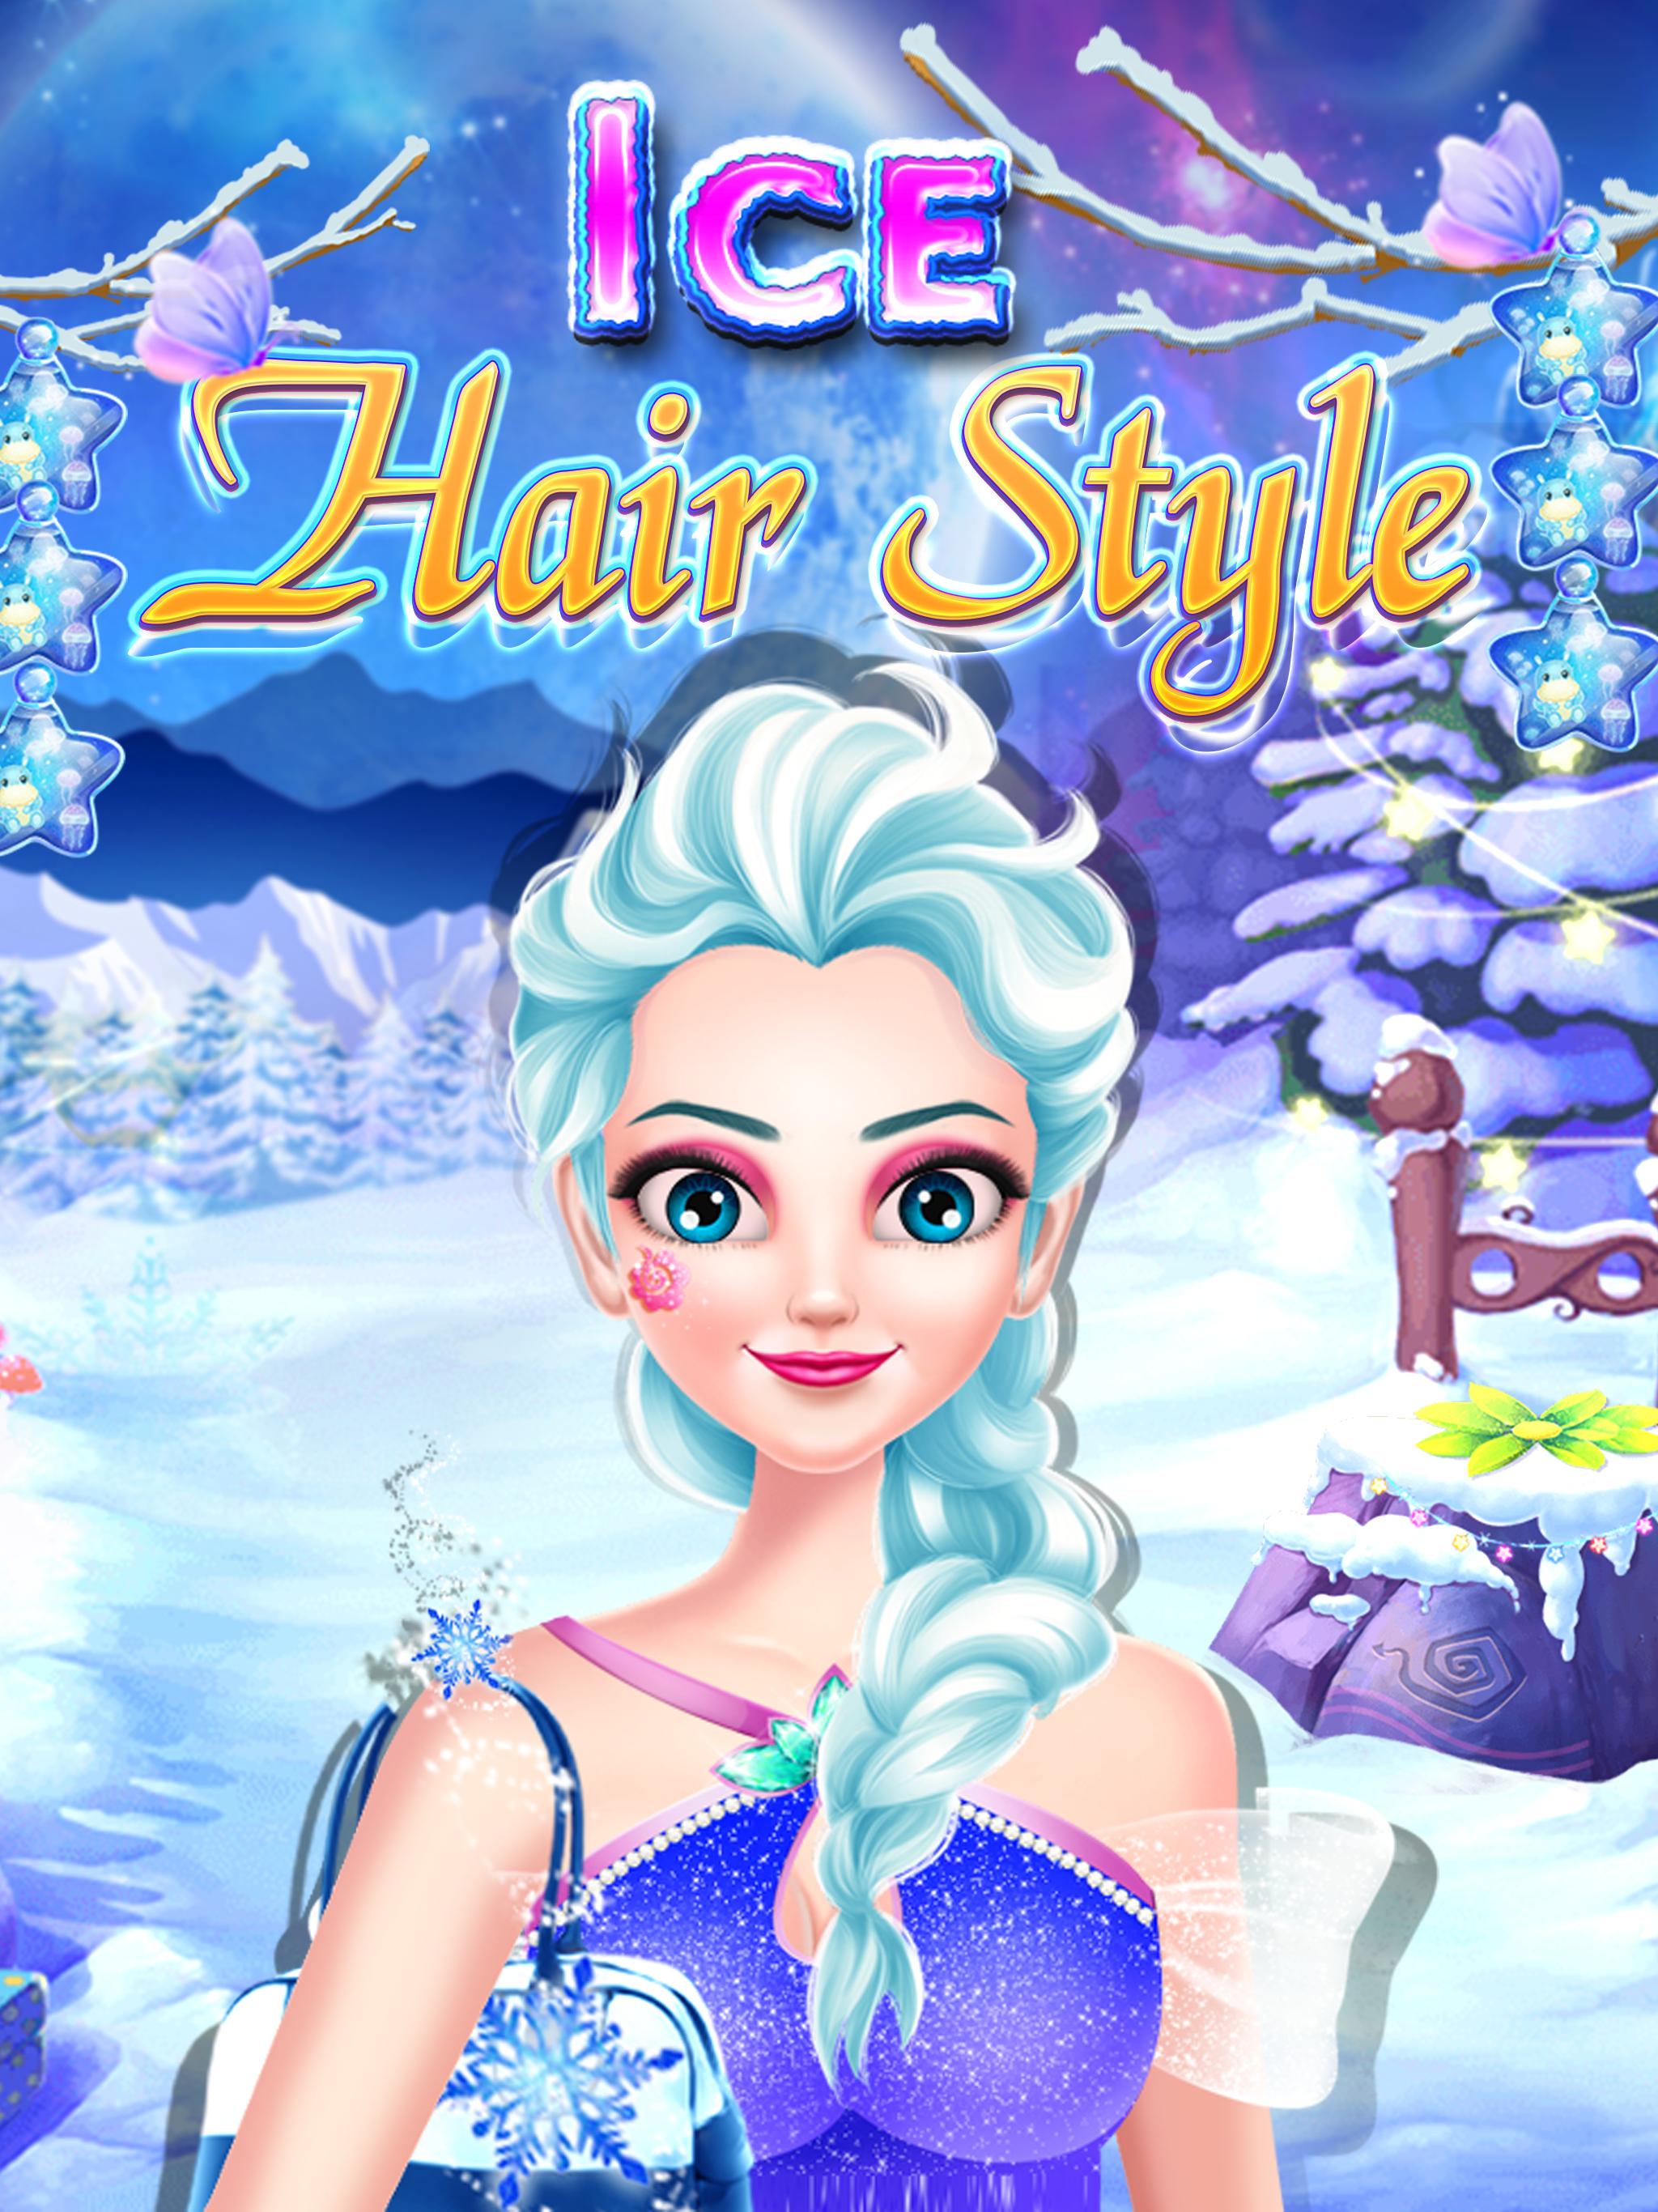 Hairdresser Games Hair Style Games For Android Apk Download